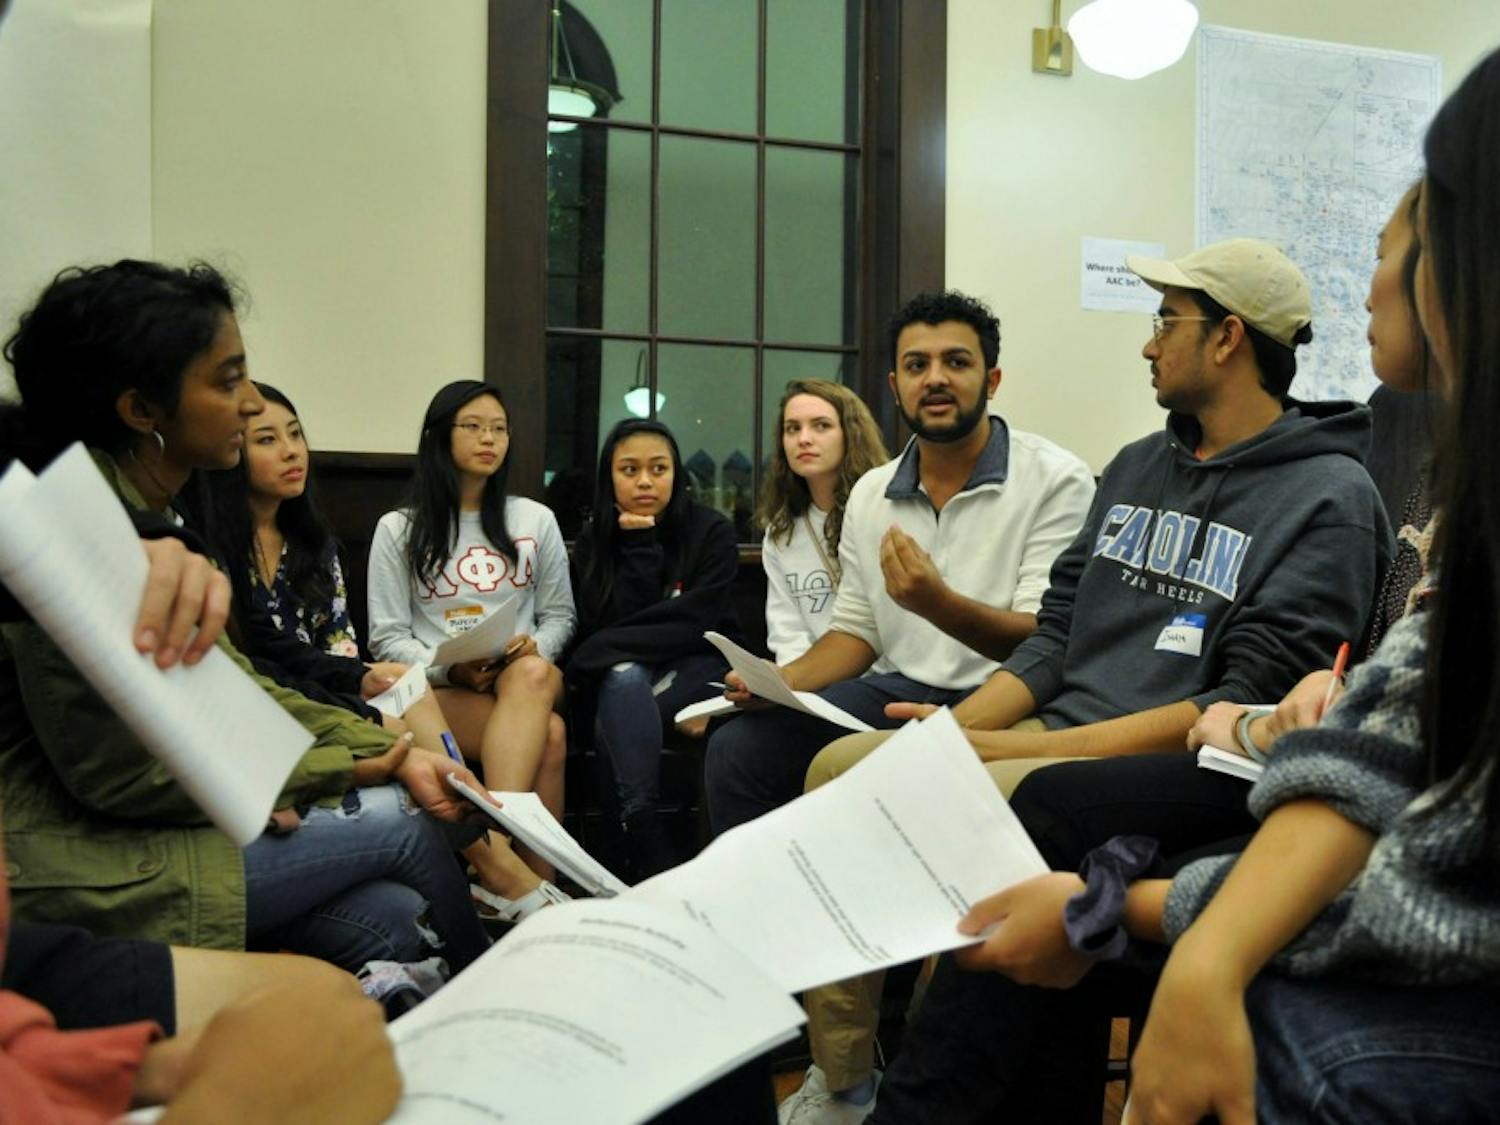 Students participate in a reflection activity during an open forum hosted by the Asian American Center Student Advisory Board at Campus Y's Anne Queen Lounge on Thursday, Oct. 24, 2019. The forum gave attendees the chance to learn about the movement to establish an Asian American Center on campus.